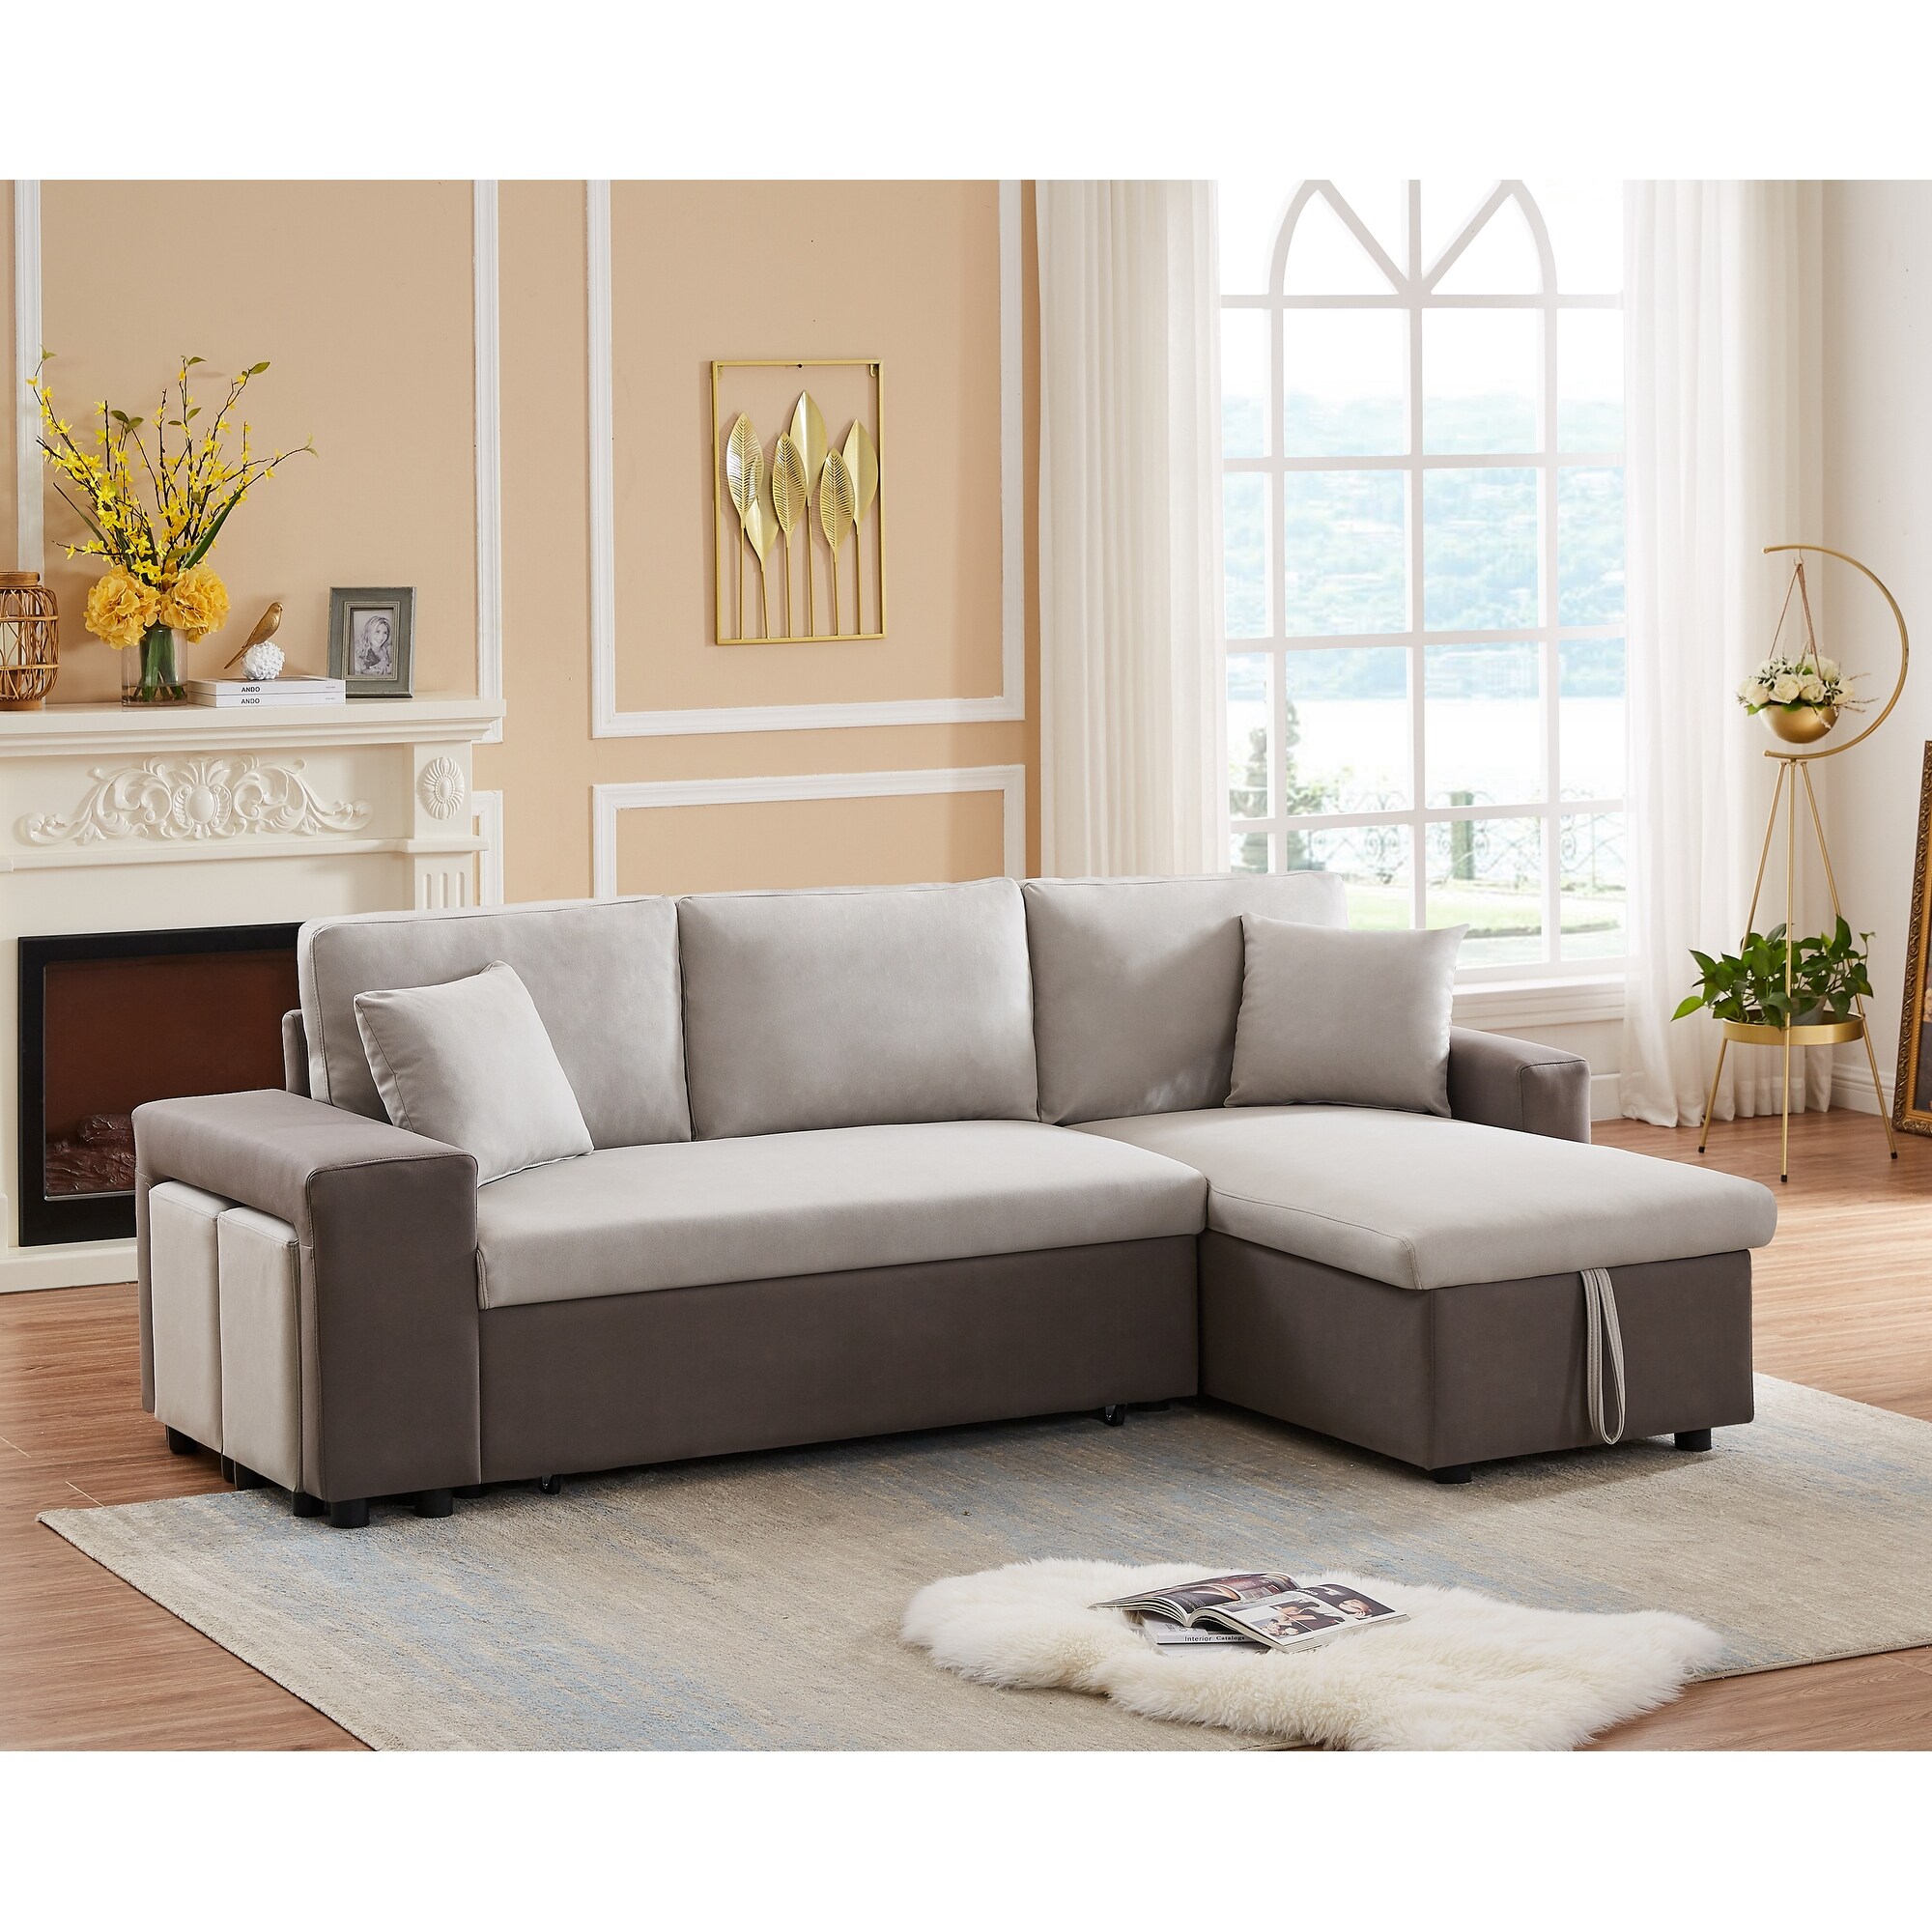 92.5 Reversible Sleeper Sectional Sofa with storage and 2 stools